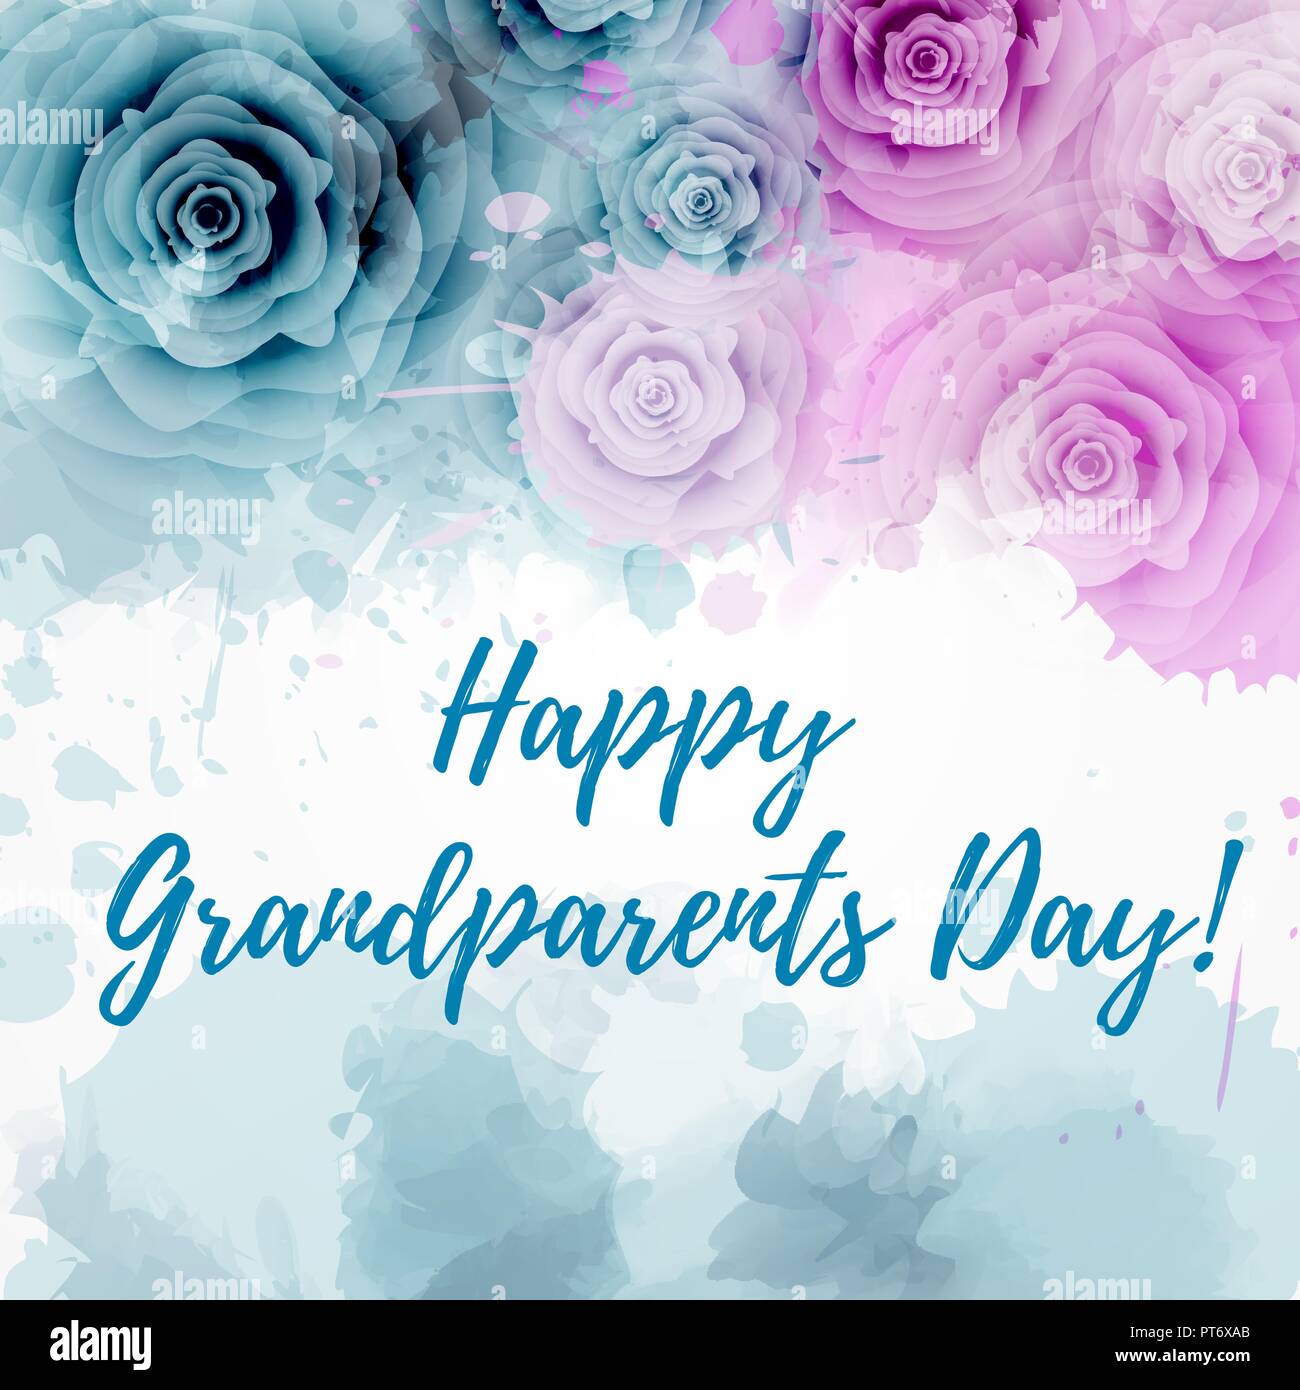 Happy Grandparents day! Abstract watercolor greeting card background with blue and purple roses. Stock Vector